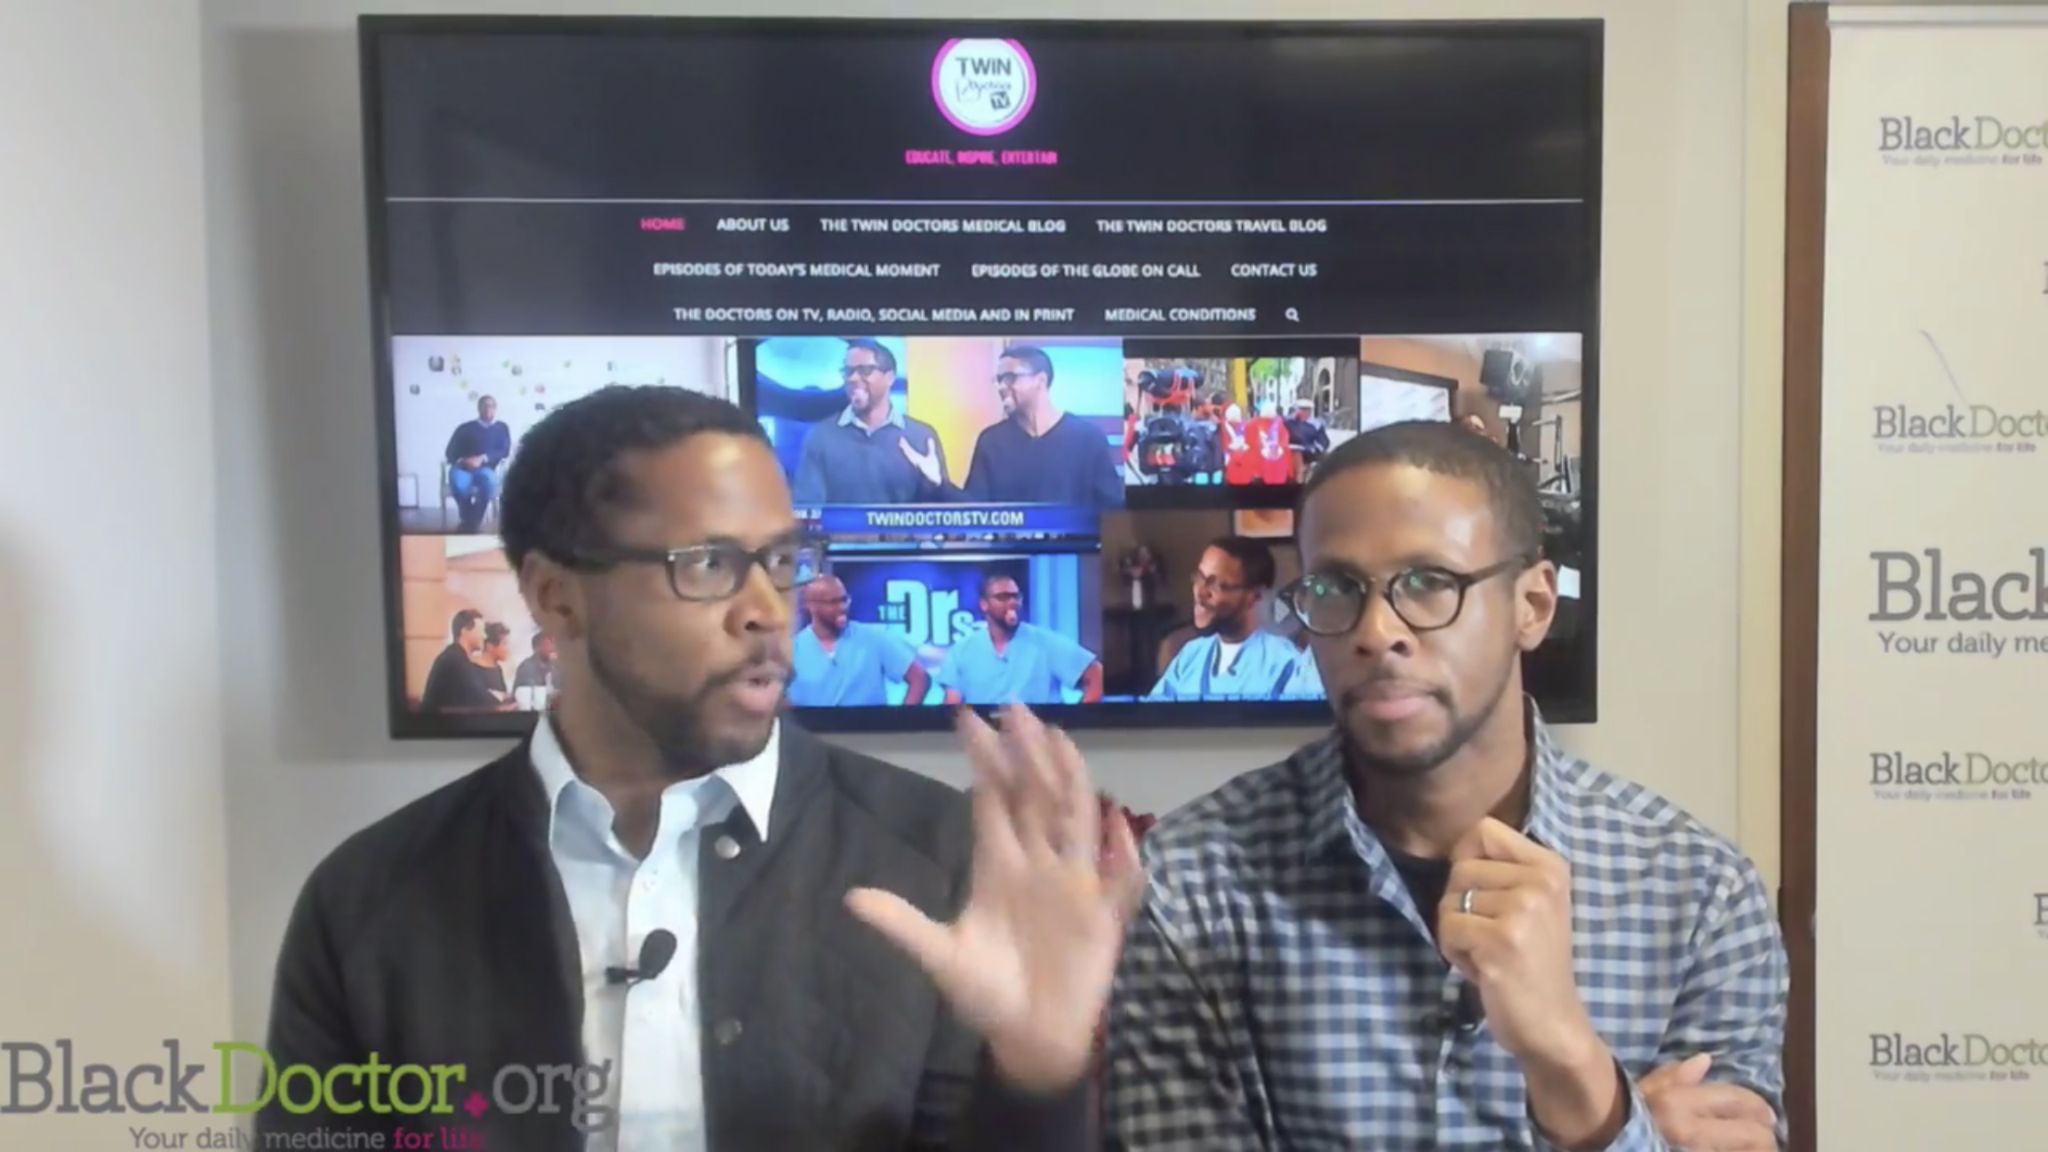 Monthly House Call (Medical Q&A) With BlackDoctor and Twin Doctors TV